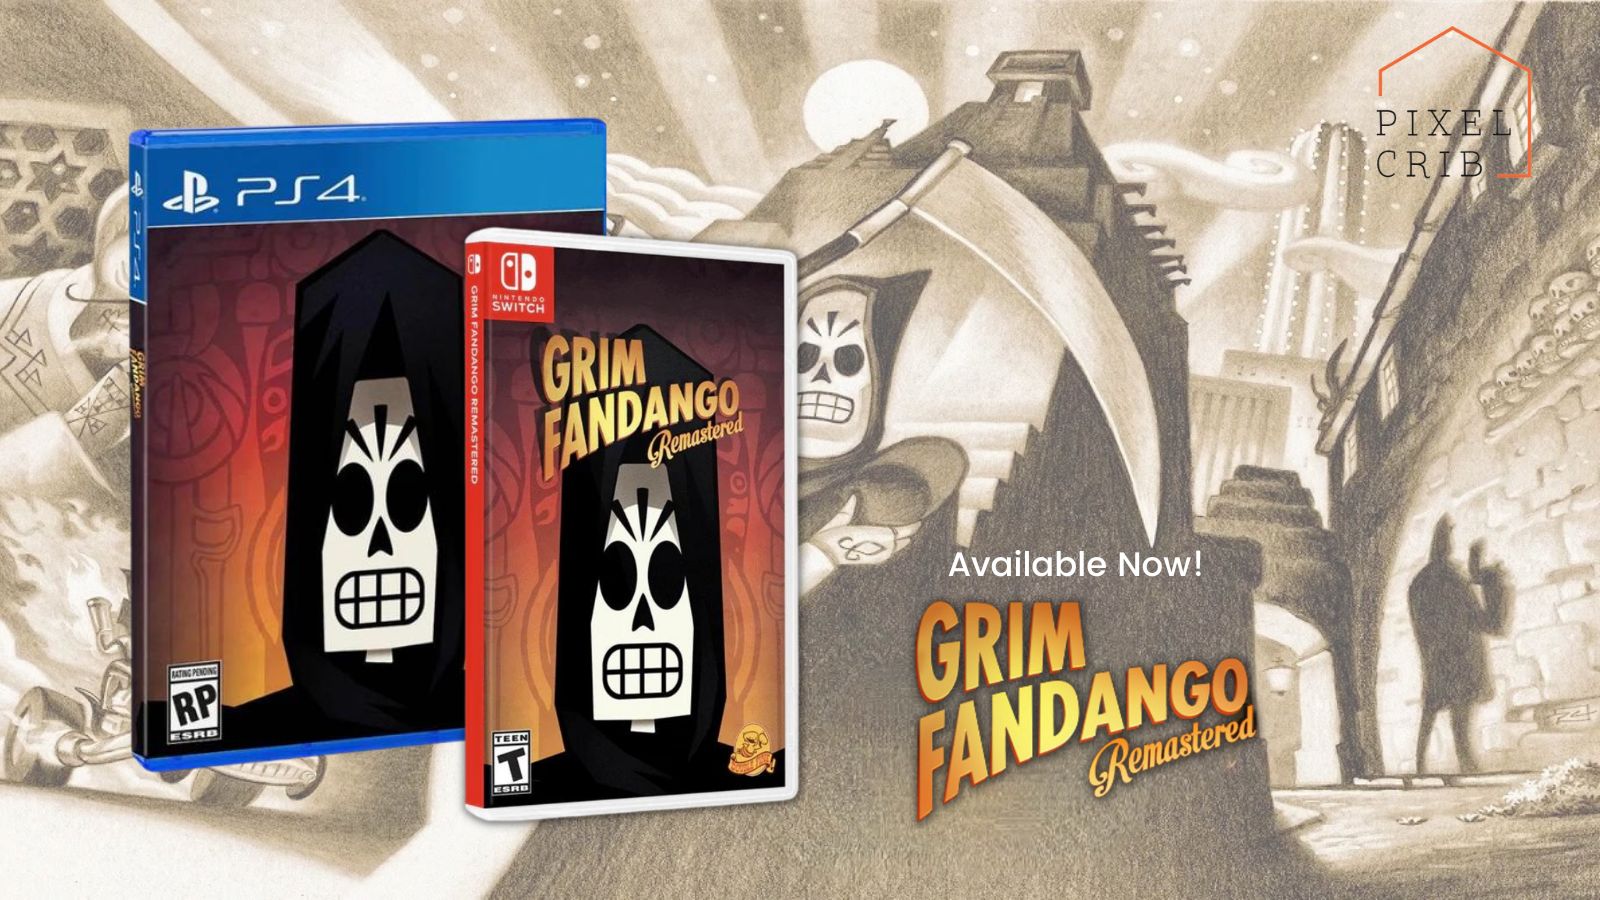 Grim Fandango Remastered - Available Now!